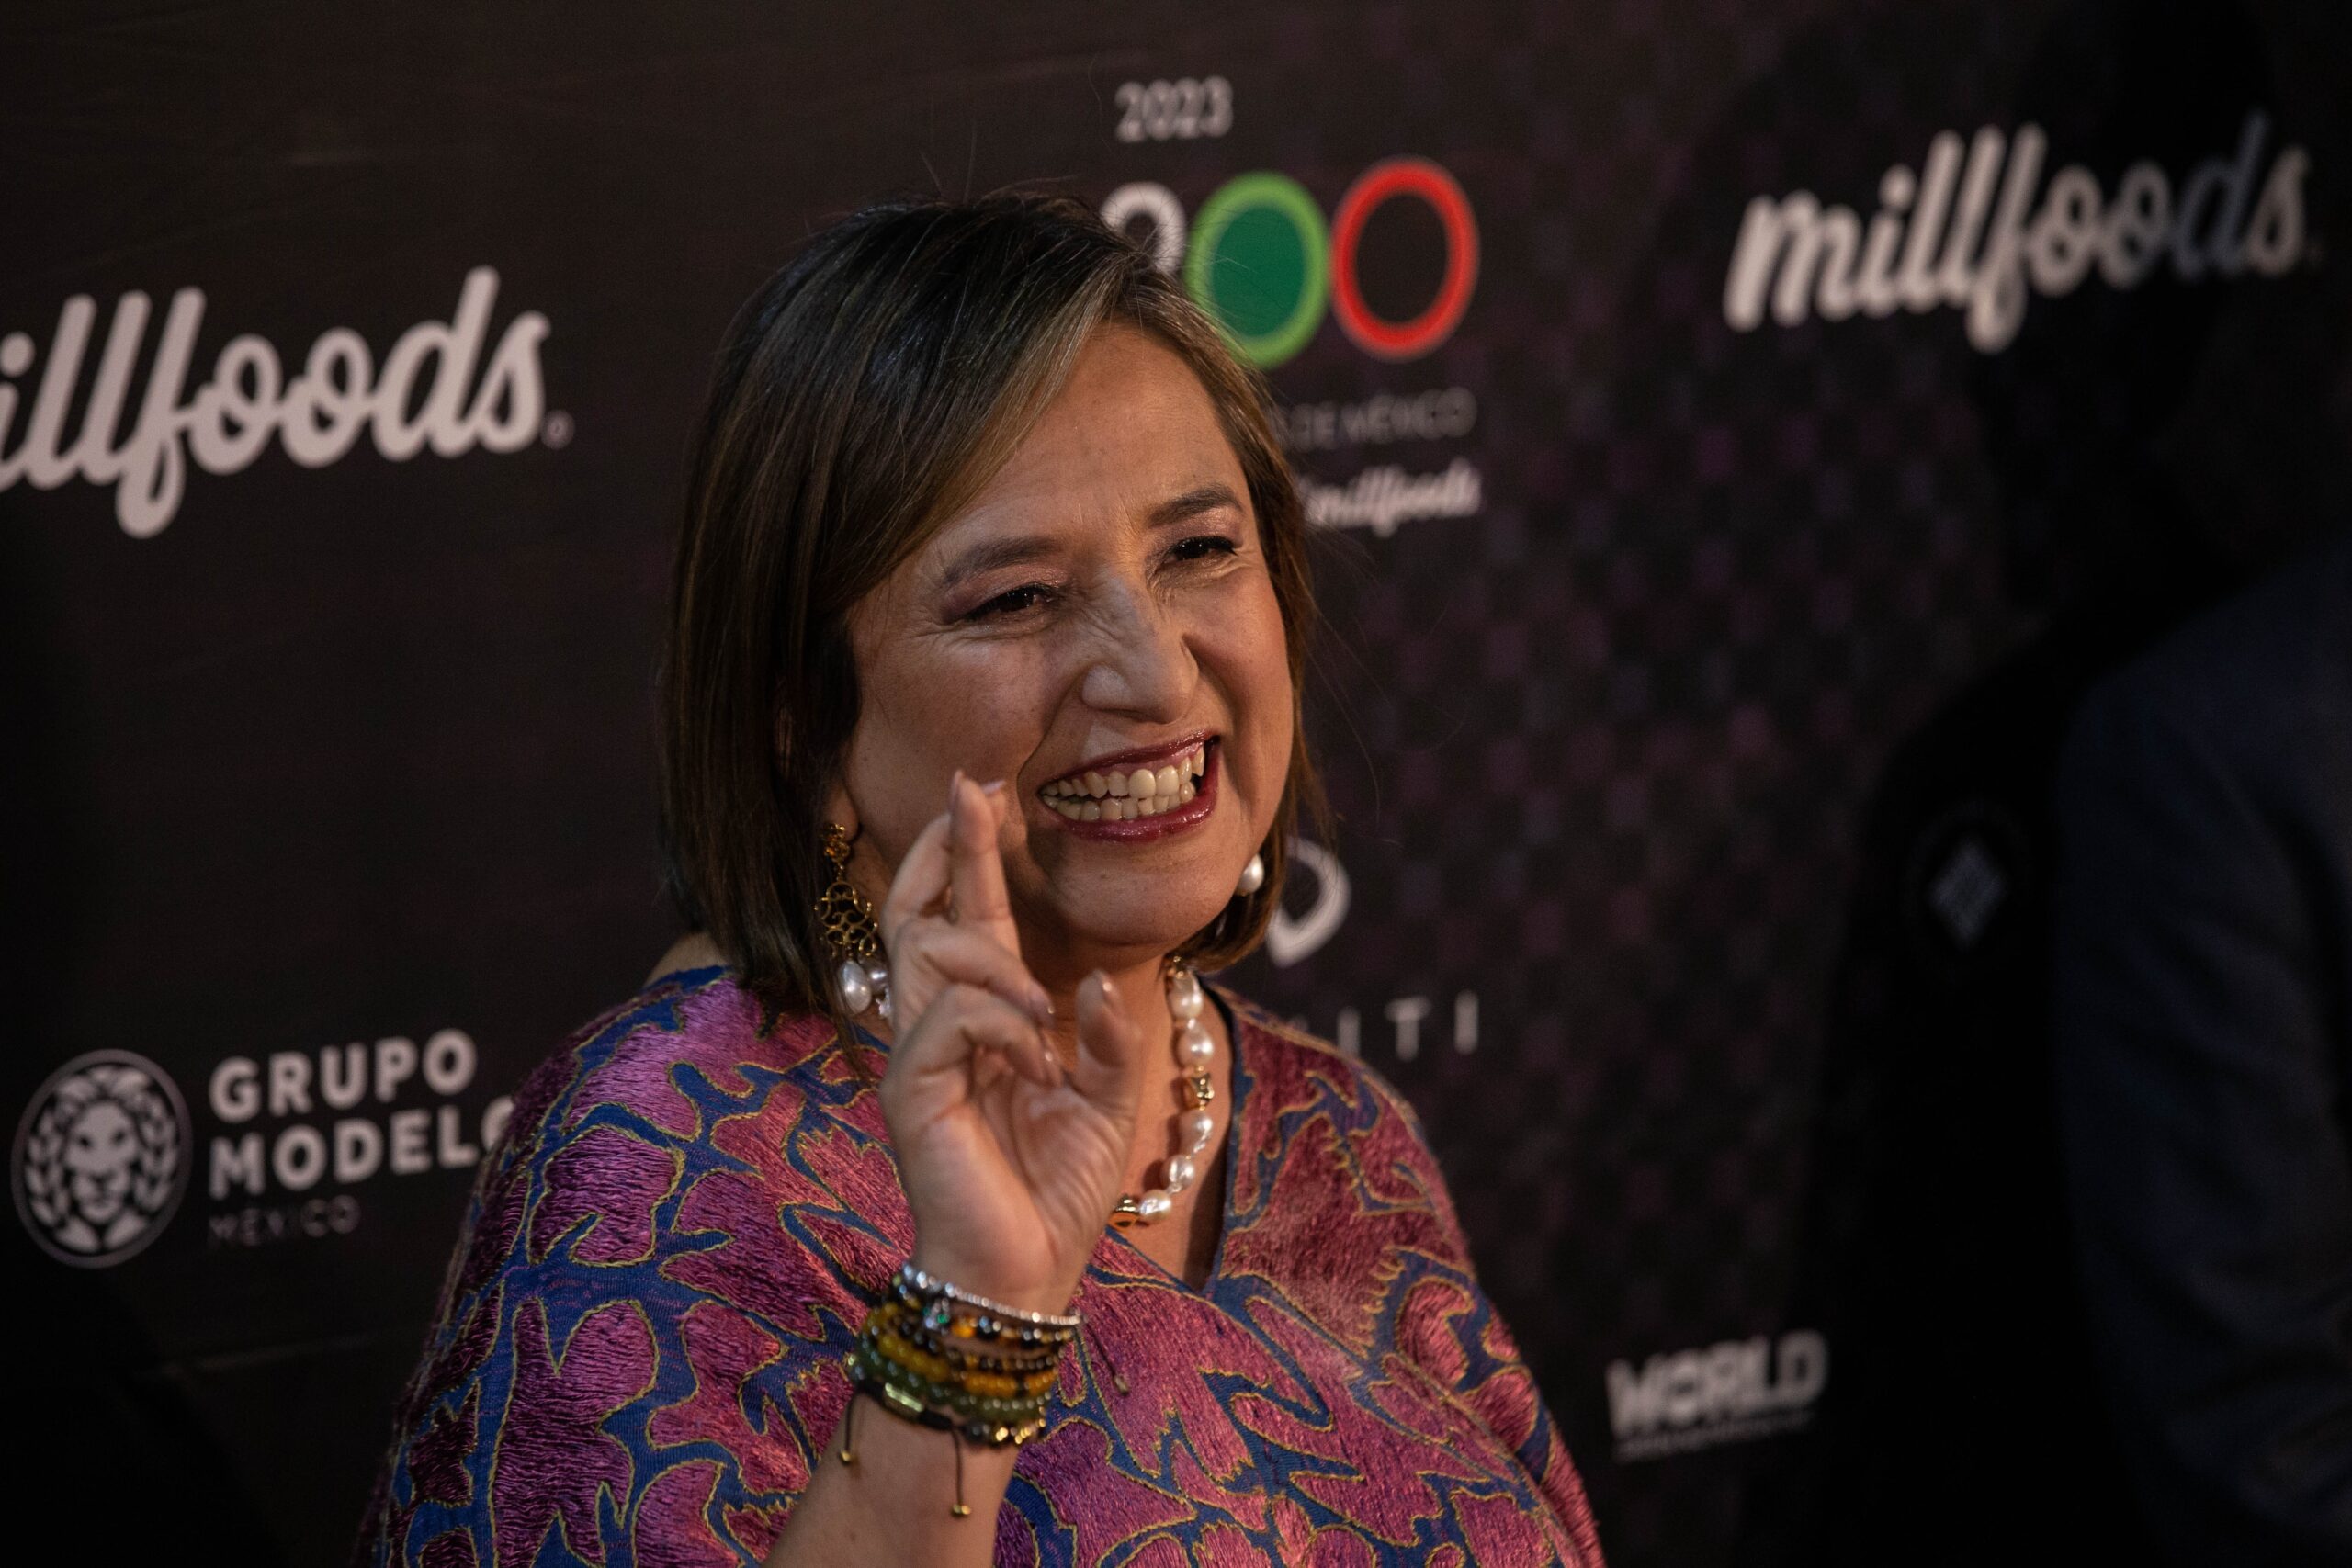 Bertha Xóchitl Gálvez Ruiz, a candidate in the upcoming election in Mexico, is standing in front of a step-and-repeat, holding up her hand and smiling.